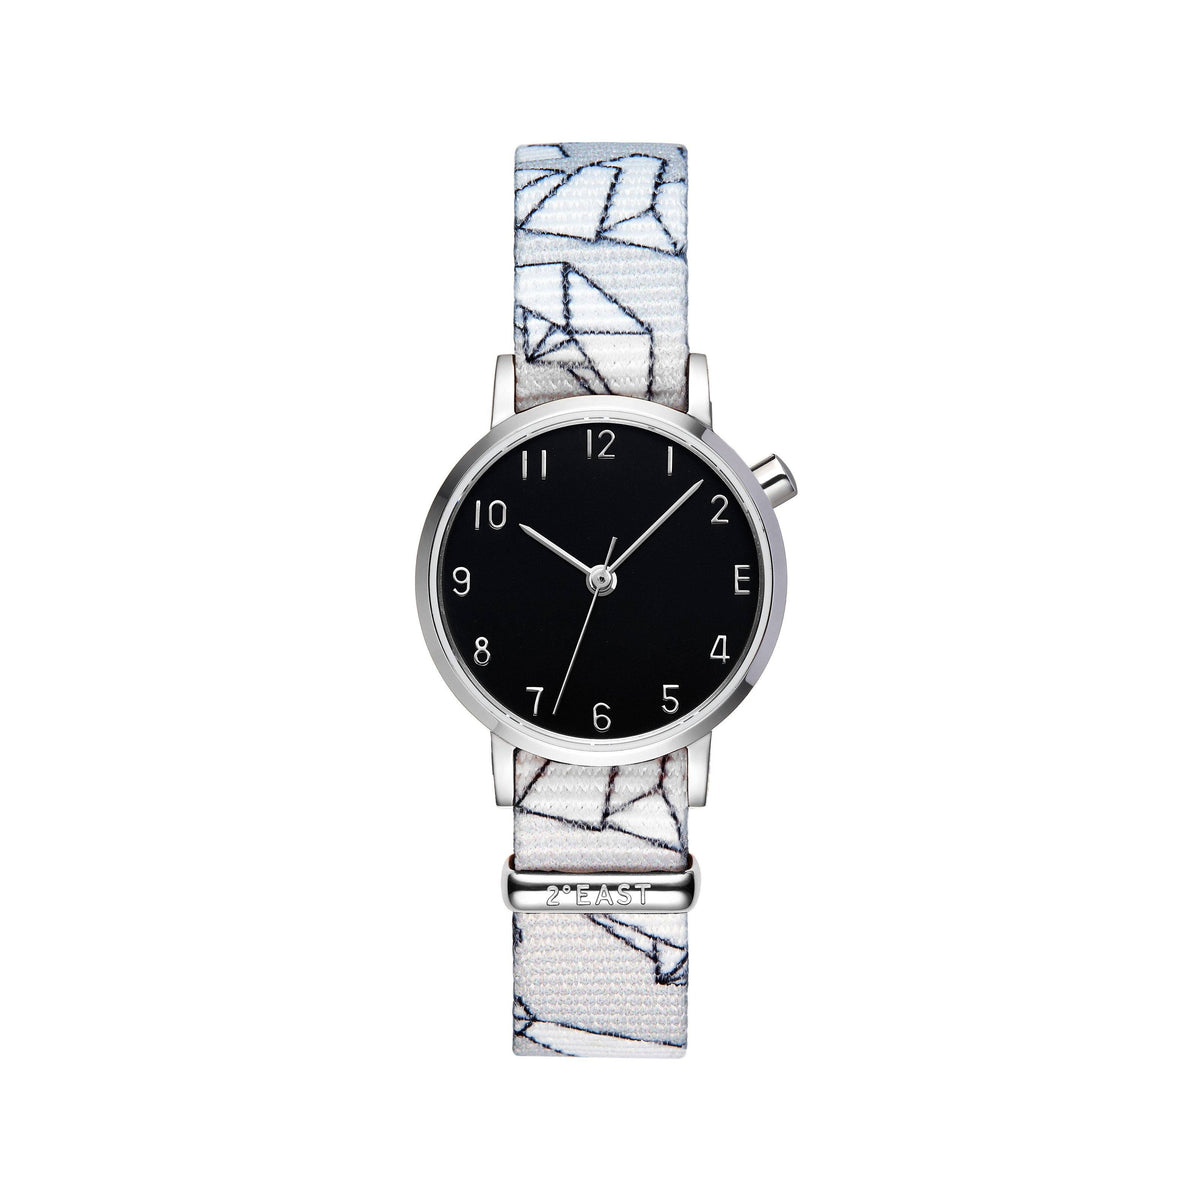 The Black and Silver Watch - Origami (Kids)